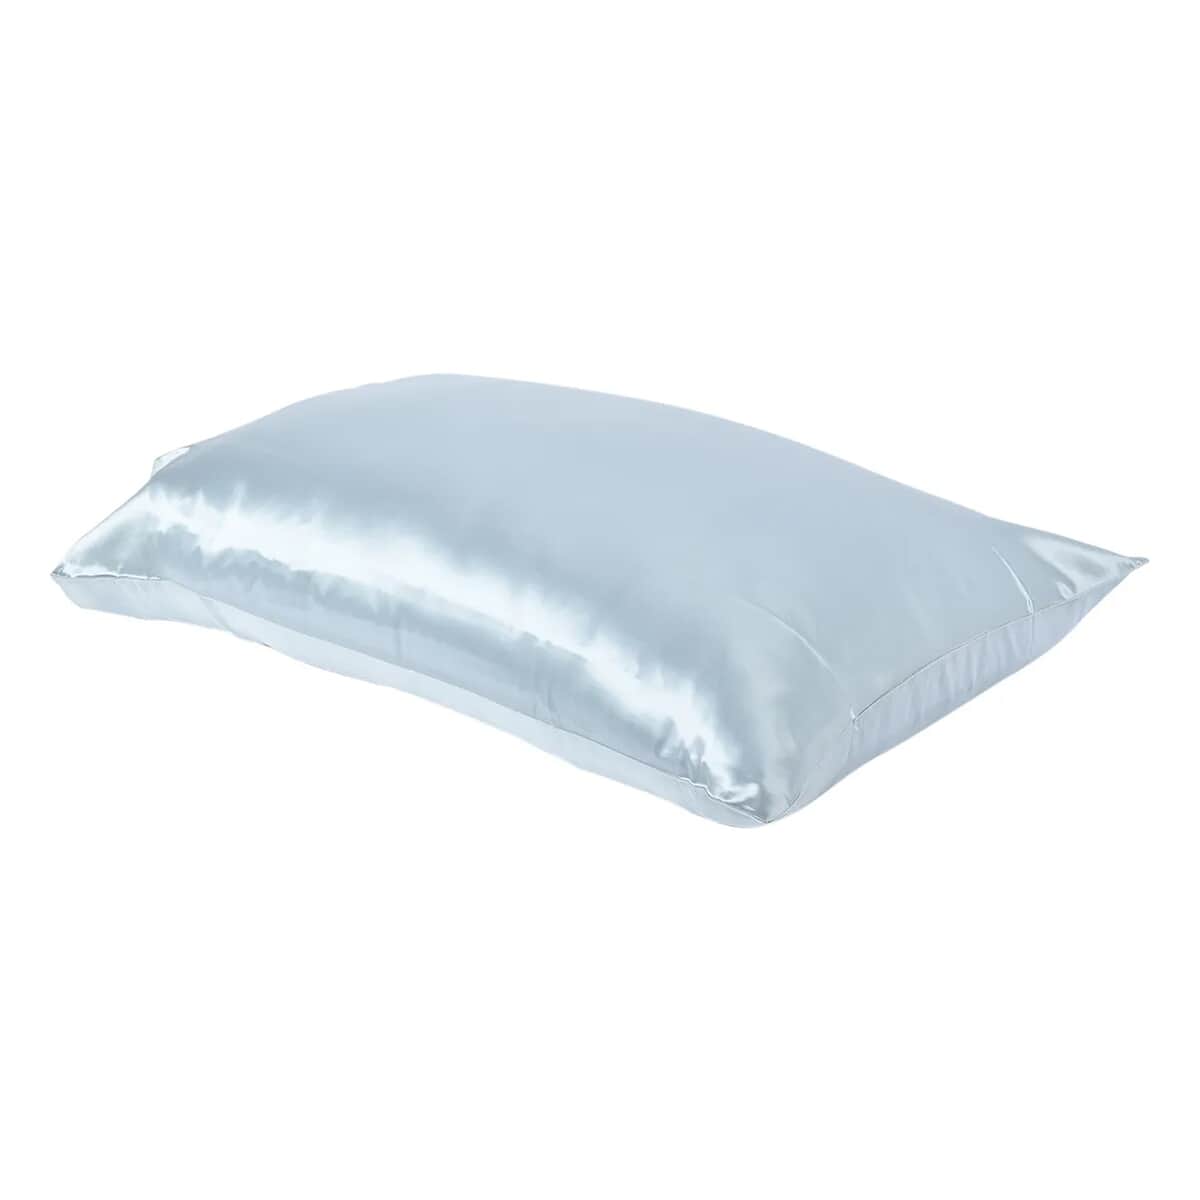 Symphony Home Blue 100% Mulberry Silk Pillowcase Infused with Hyaluronic Acid & Argan Oil - Full, Pillow Protectors, Pillow Cover, Cushion Cover, Pillow Shams, Pillow Case Covers image number 5